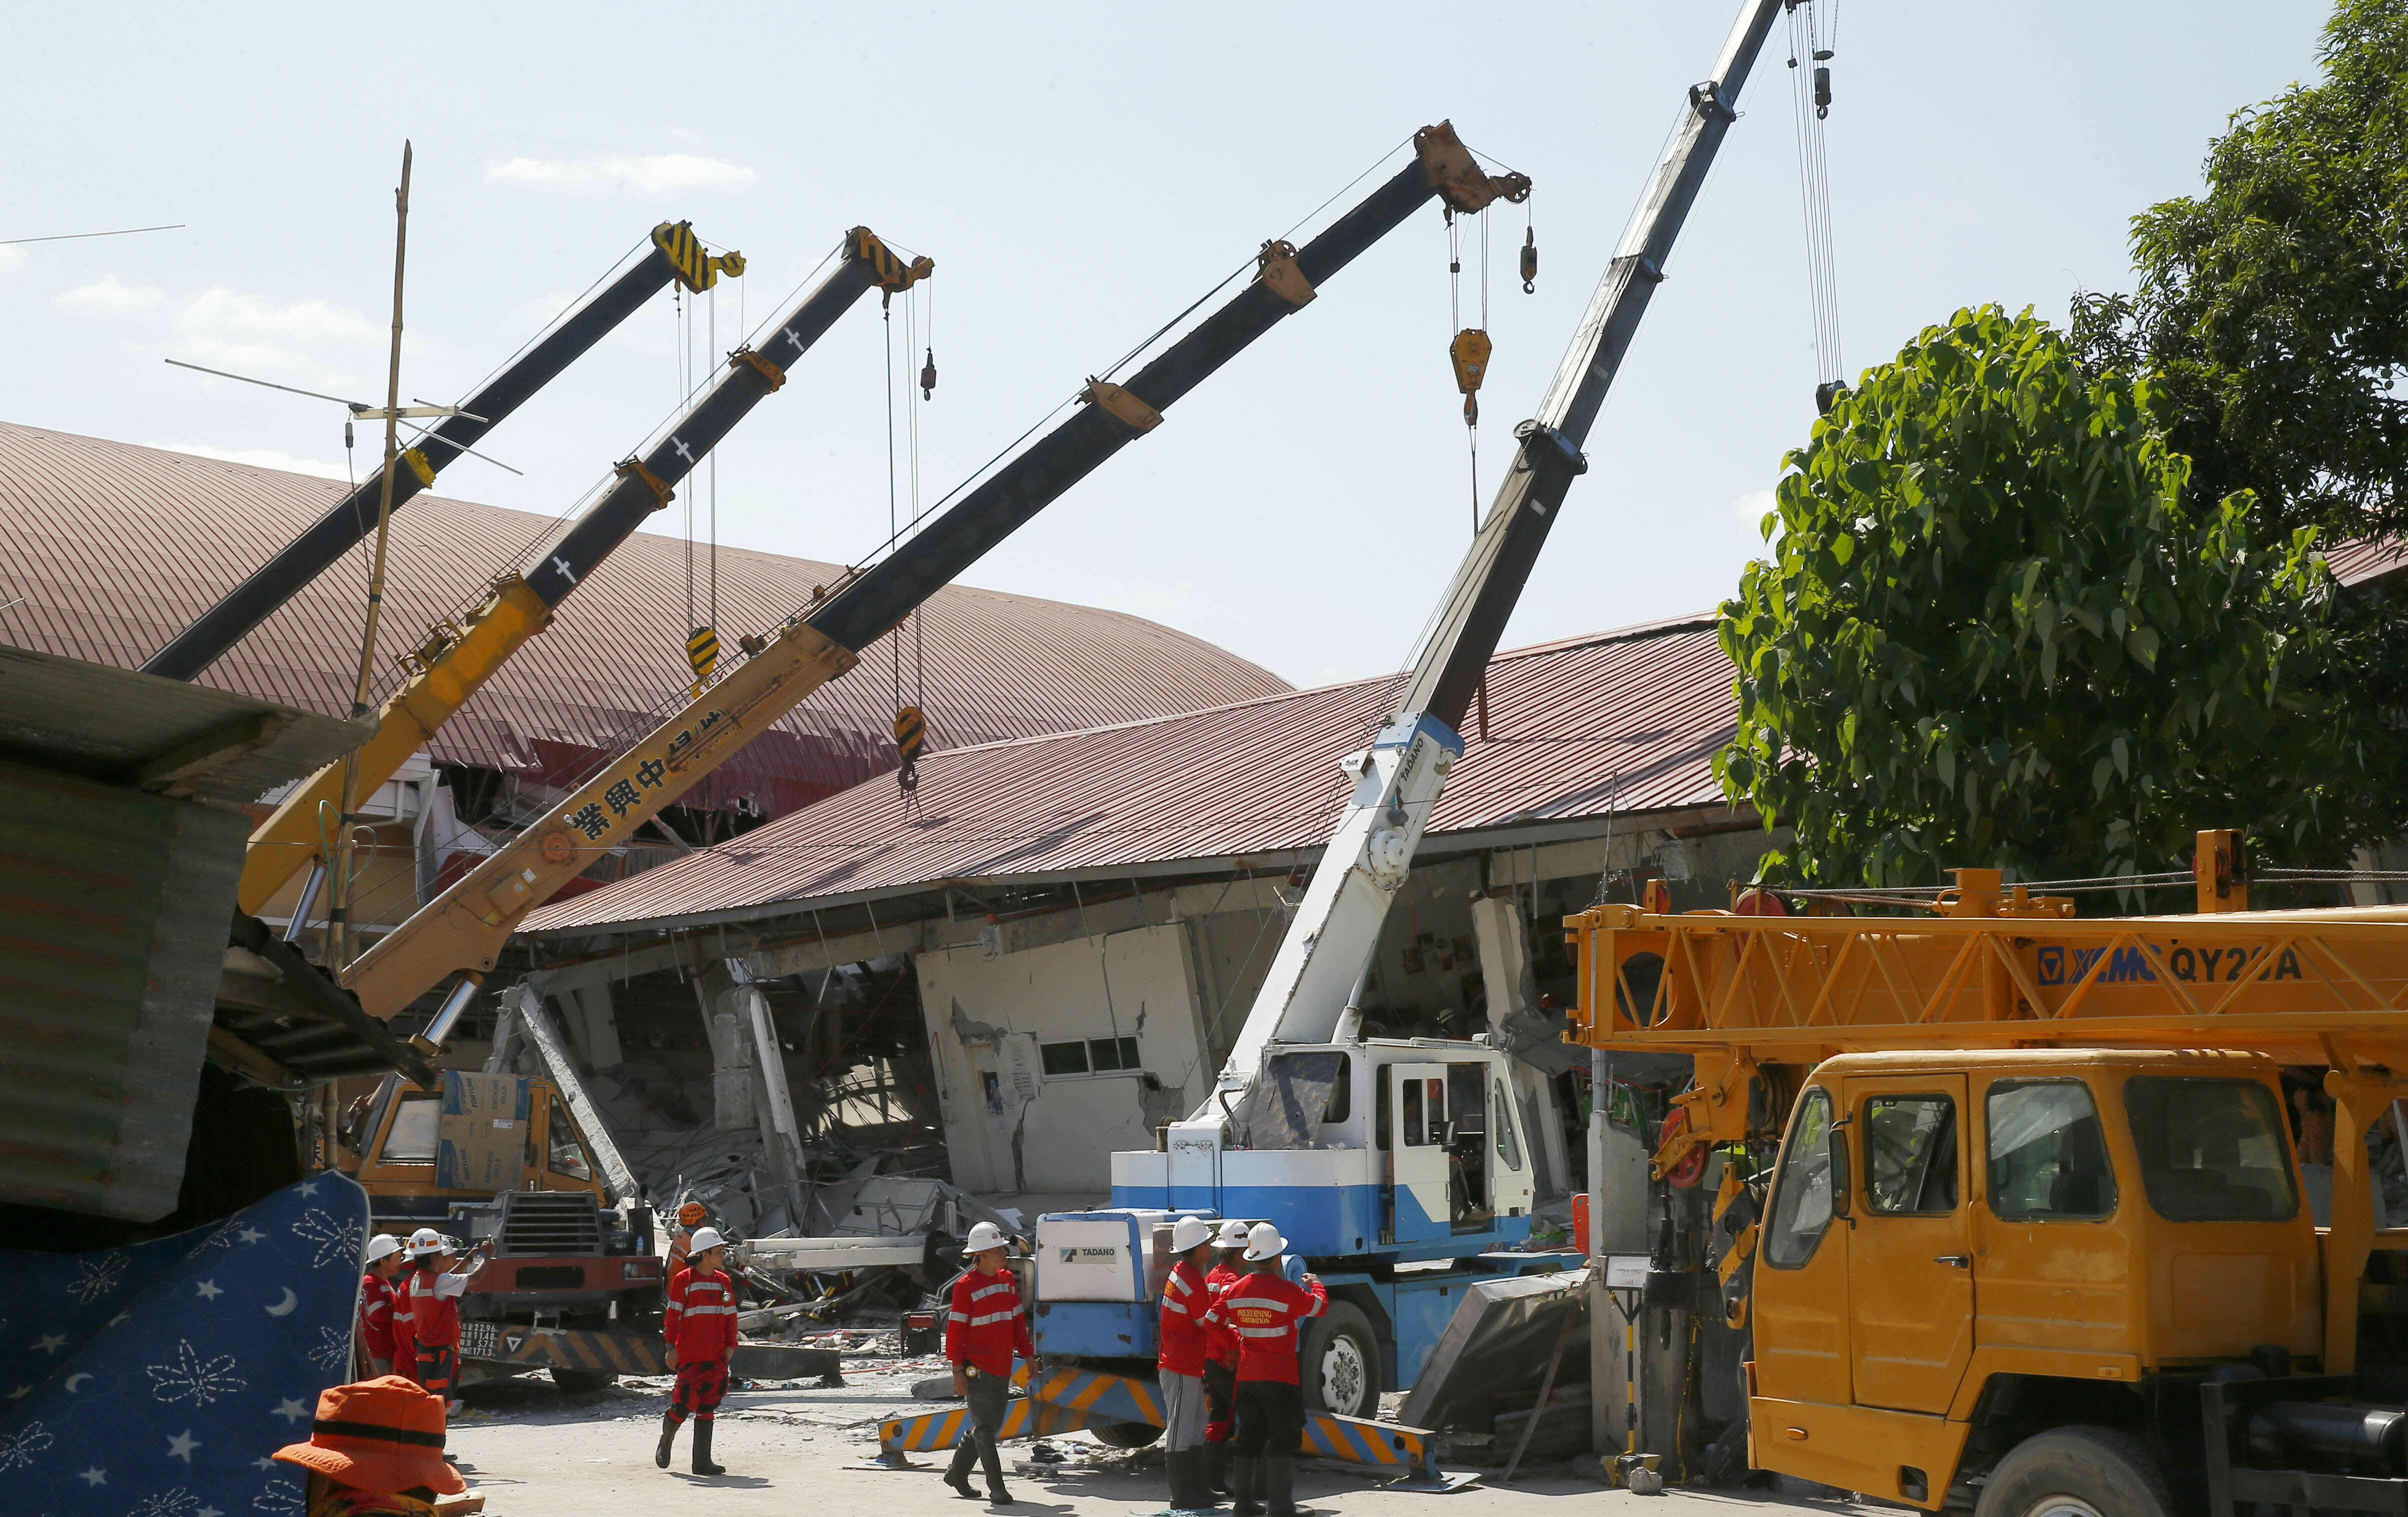 Workers fix the damage Tuesday, April 23, 2019 brought about by Monday's 6.1 magnitude earthquake that rocked Diosdado Macapagal International Airport at Clark Freeport, Pampanga province, north of Manila, Philippines. A strong earthquake struck the northern Philippines Monday trapping some people in a collapsed building, damaged an airport terminal and knocked out power in at least one province, officials said. (AP Photo/Bullit Marquez)